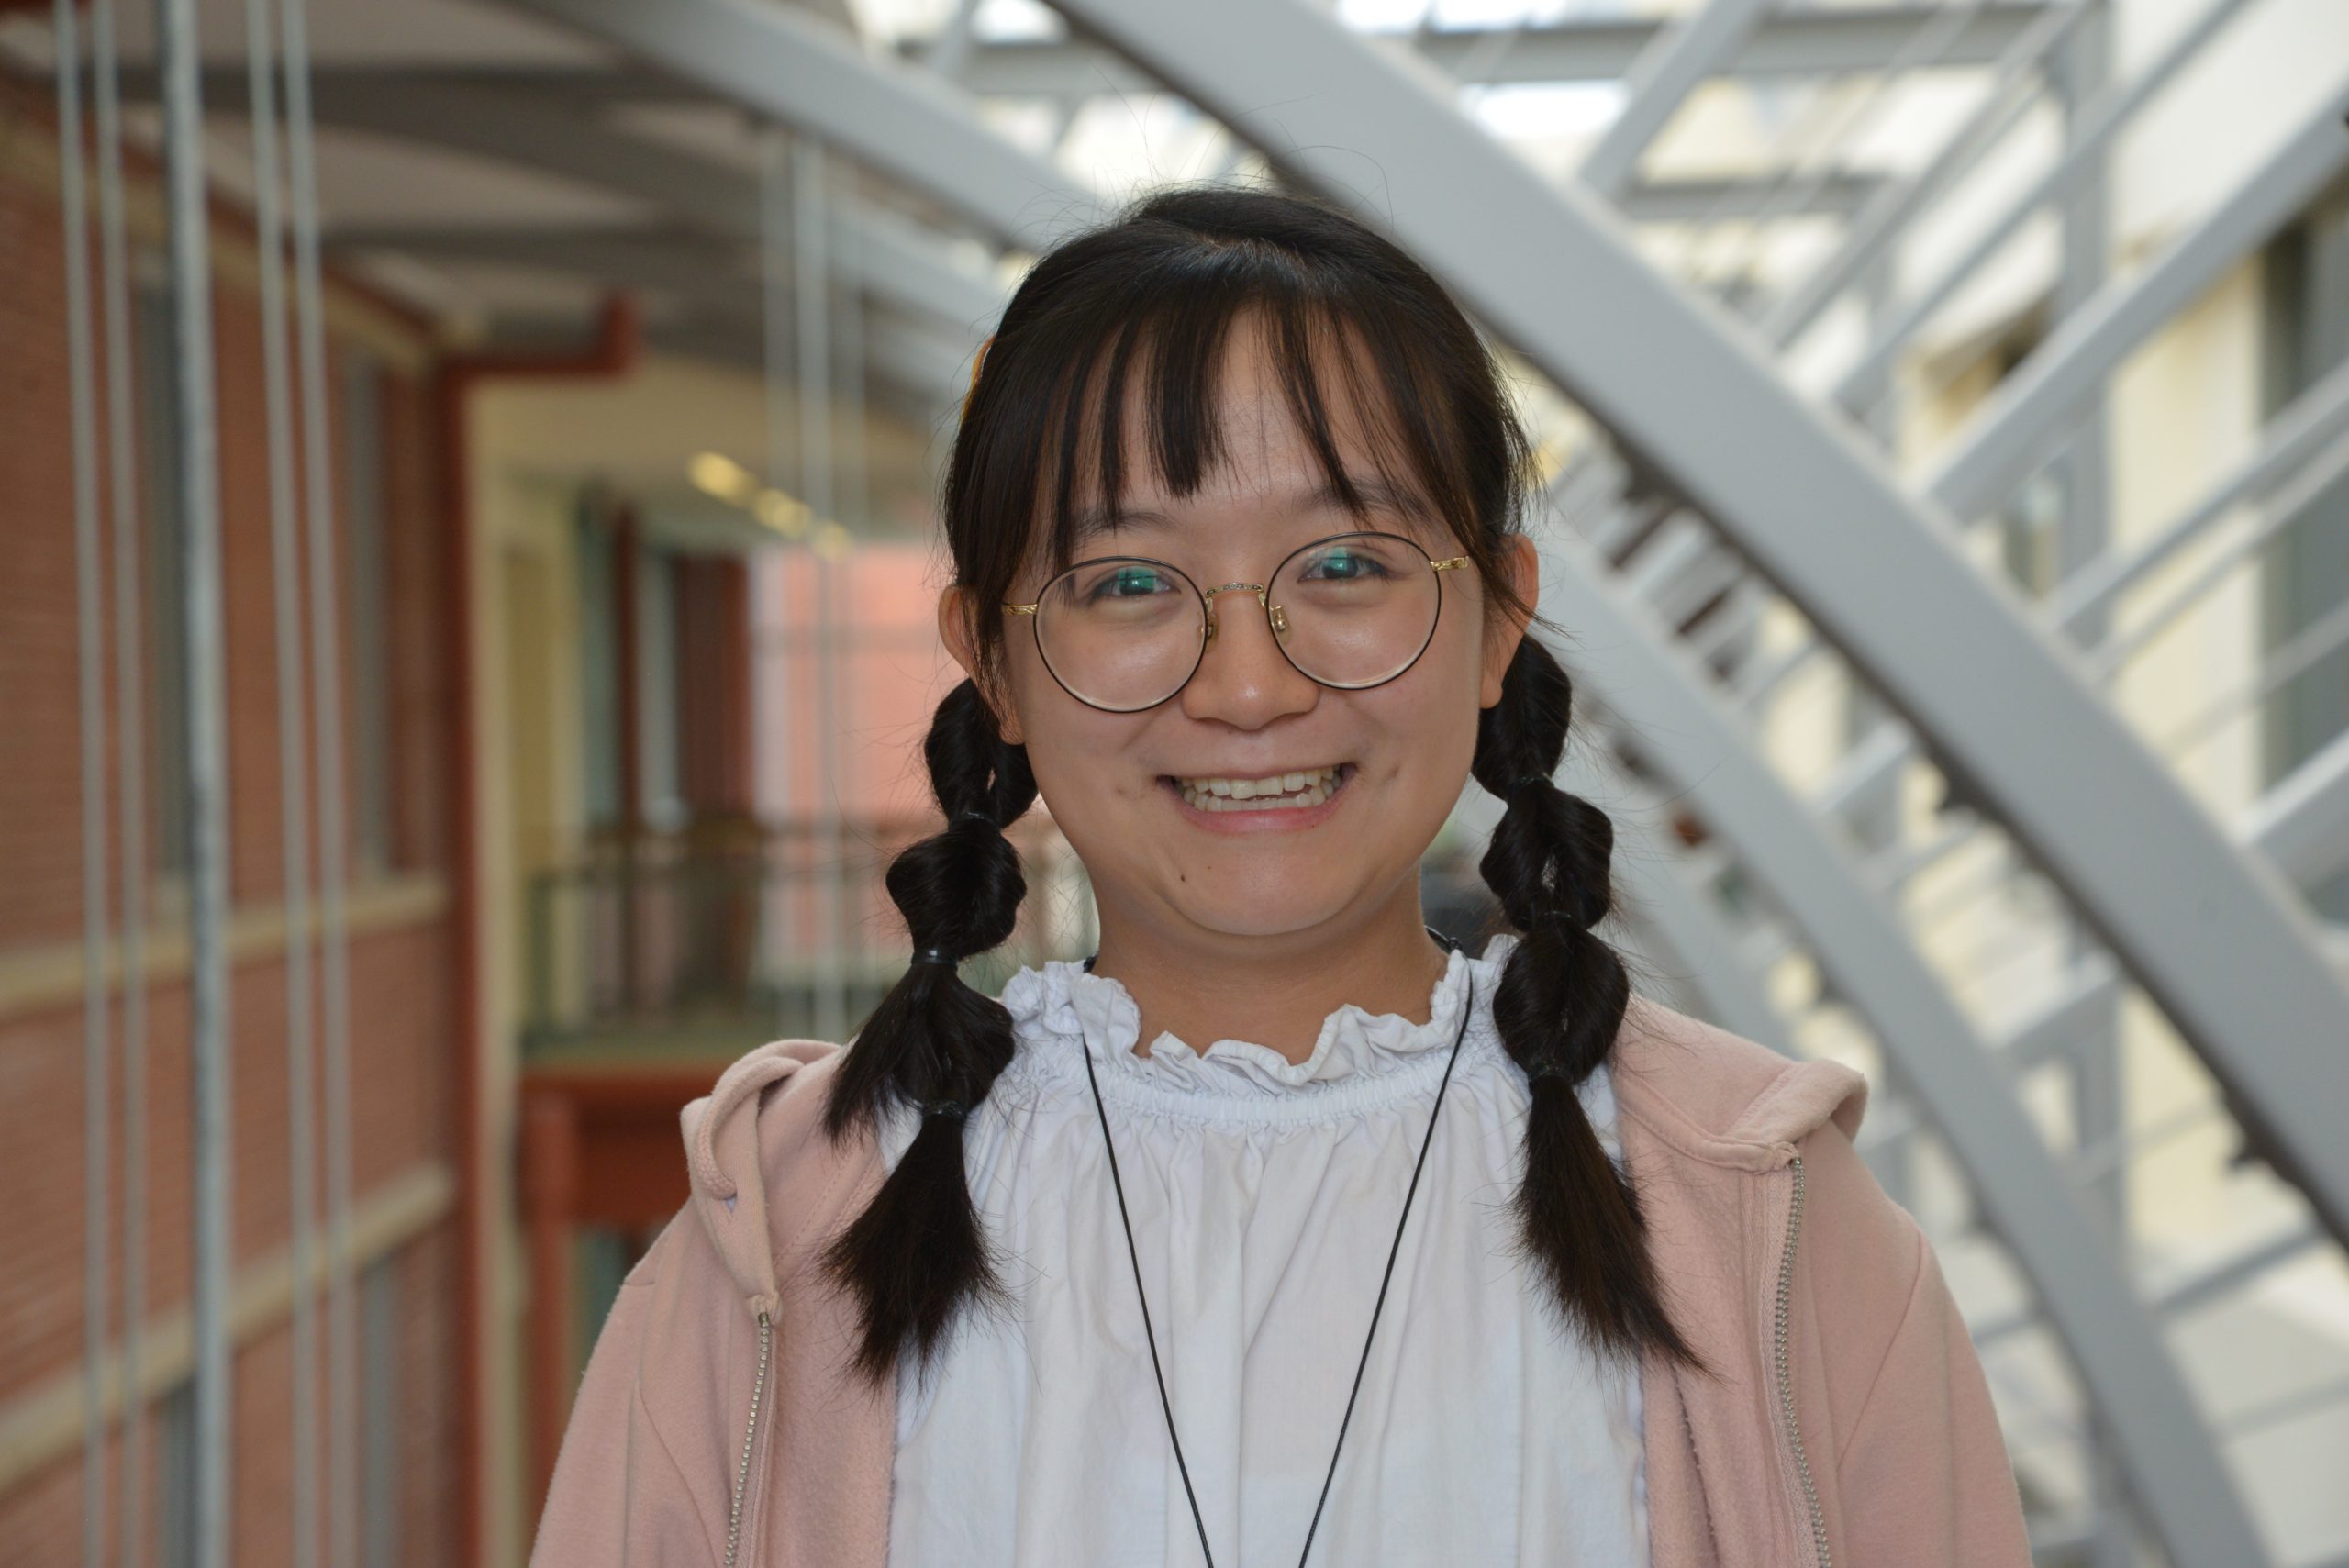 Yu-Shuang Liu (an East-Asian woman from Taiwan, with dark brown hair in pigtails, wearing glasses, a white shirt and a light pink hooded sweatshirt) smiling into the camera